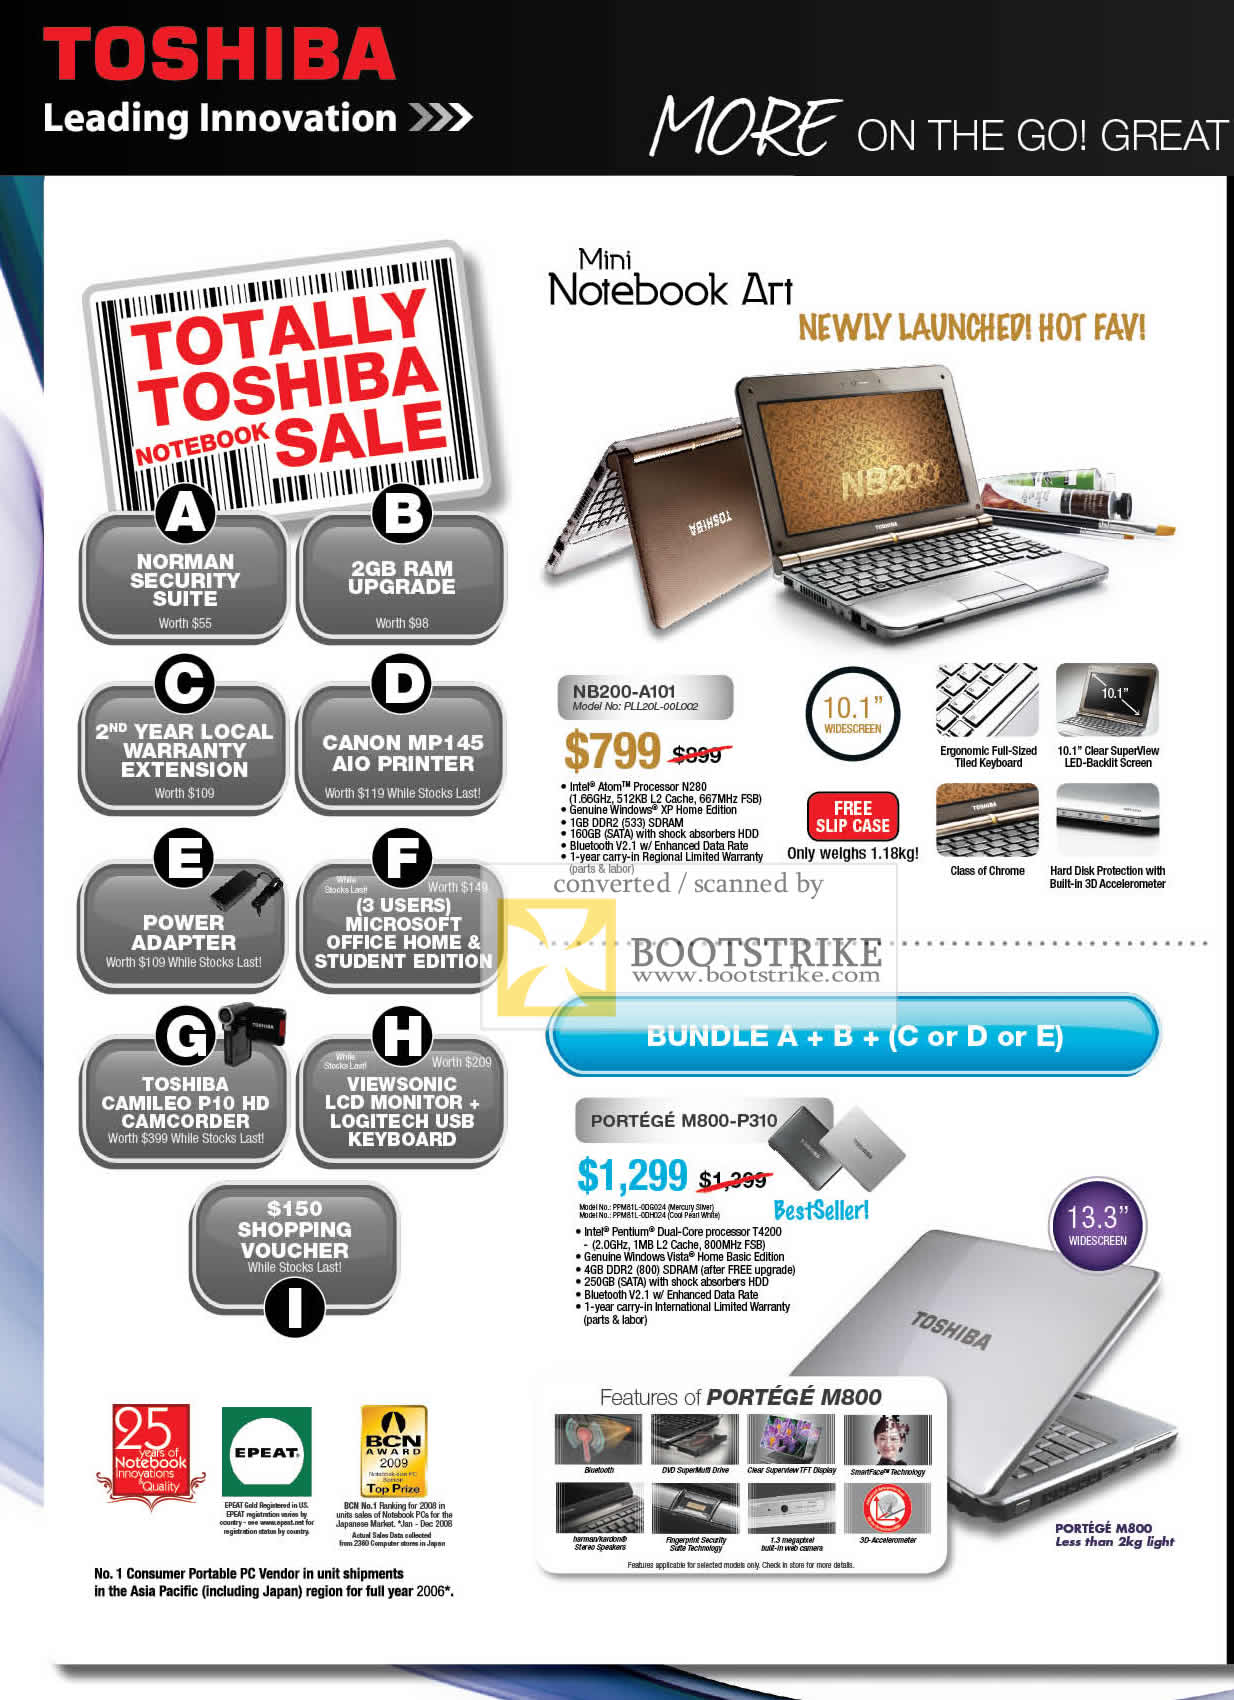 PC Show 2009 price list image brochure of Toshiba Mini Notebook Art NB200-A101 Promotion